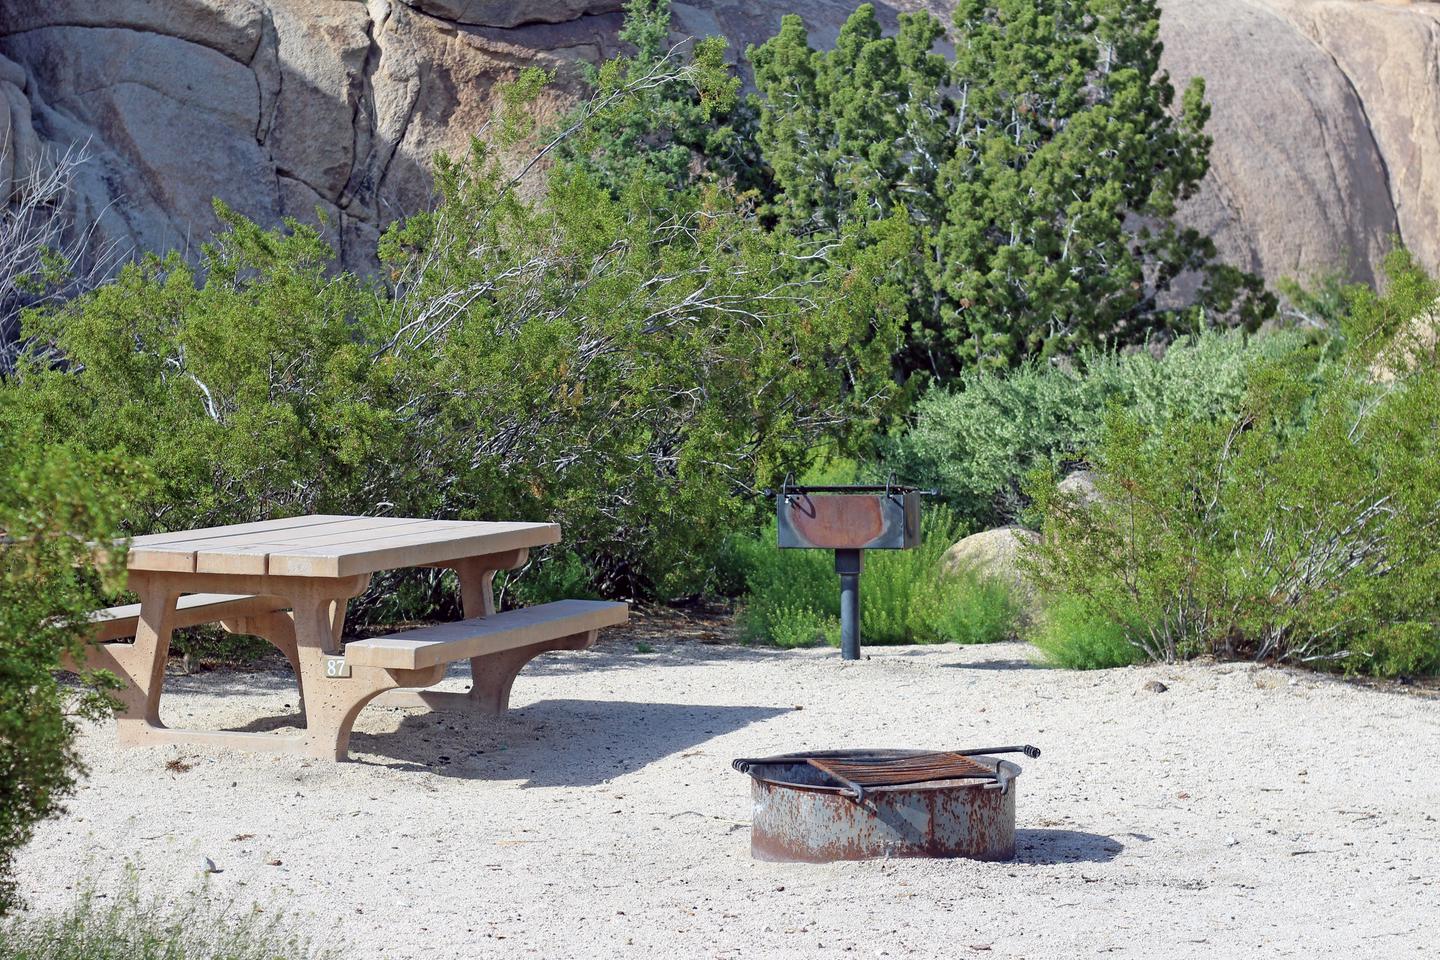  Campsite  with picnic table surrounded by boulders and green plants.Campsite.